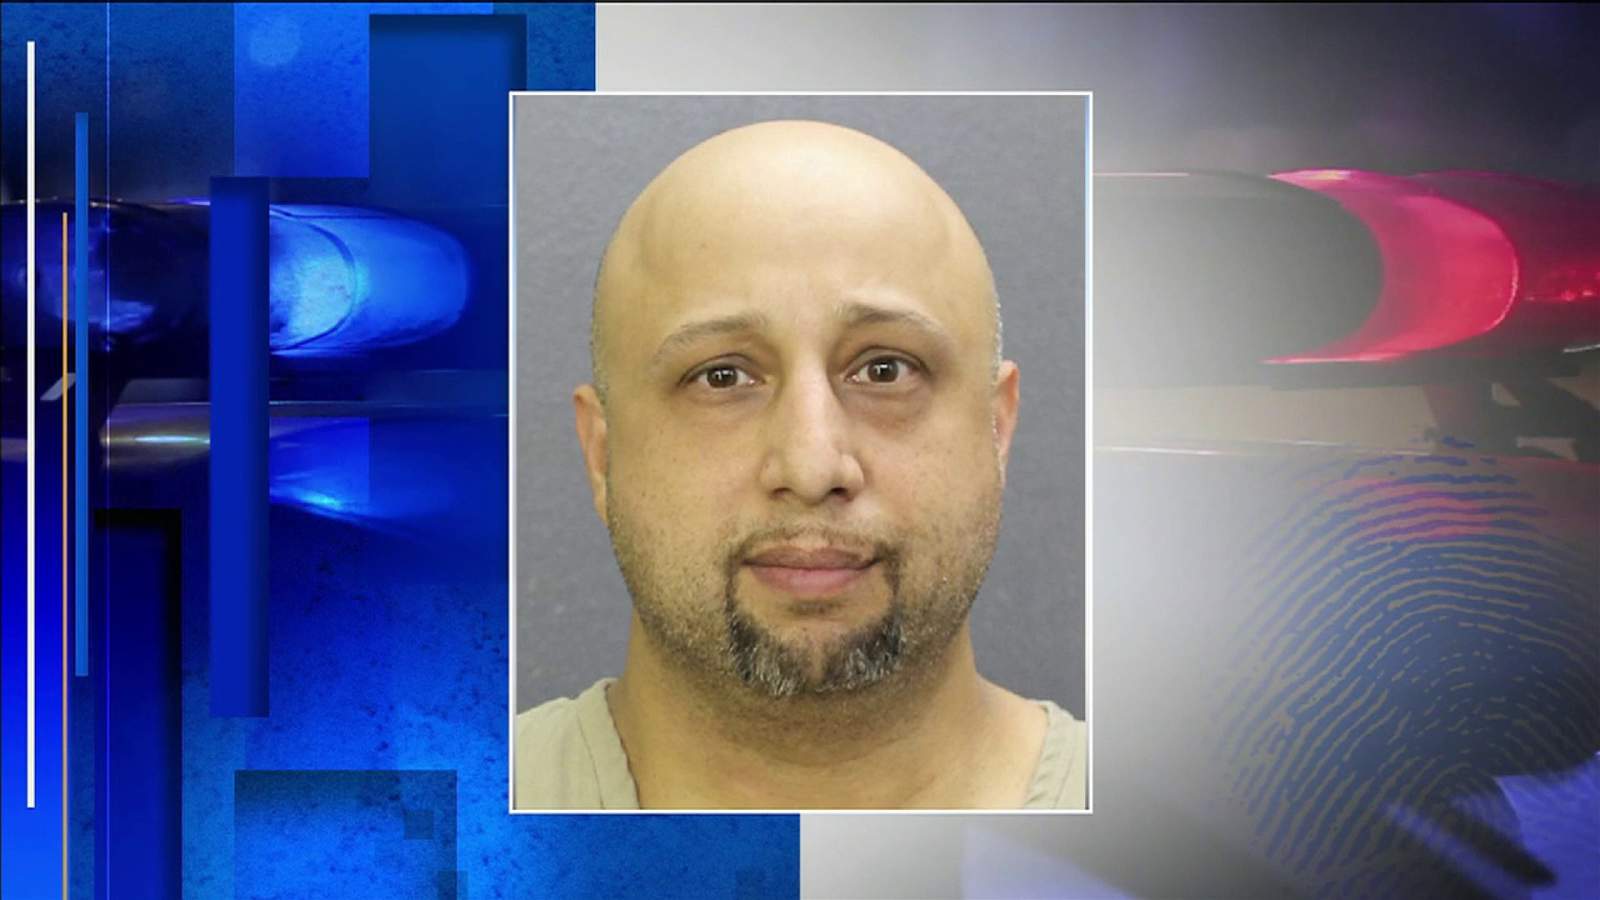 Man, 40, arrested for following teenage girl, spying on her in shower, police say